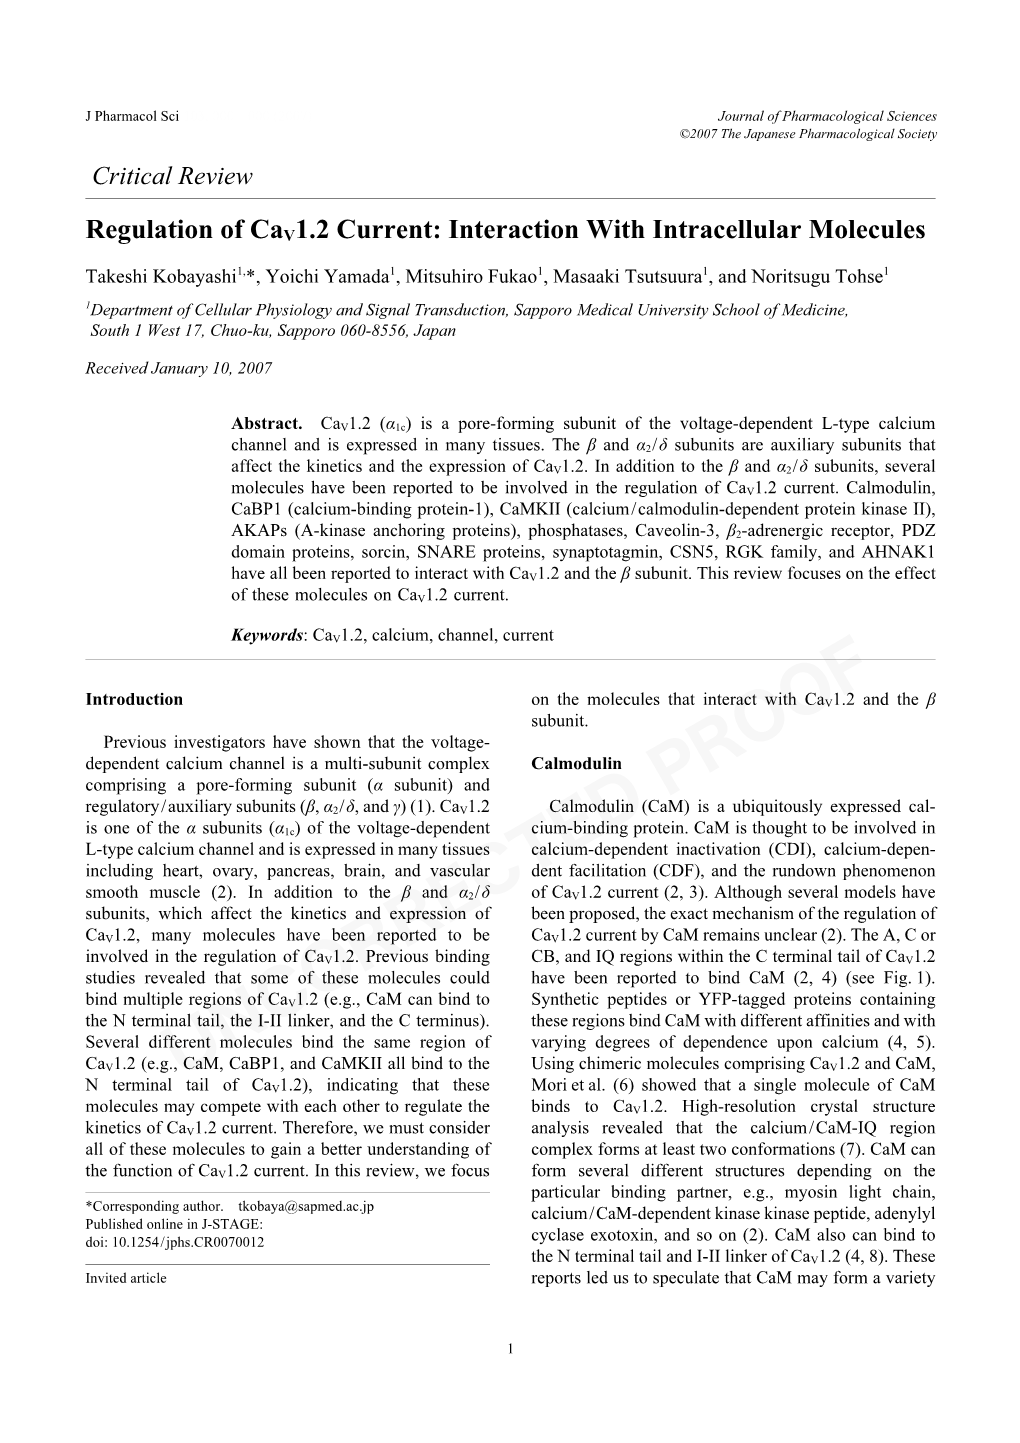 Regulation of Cav1.2 Current: Interaction with Intracellular Molecules